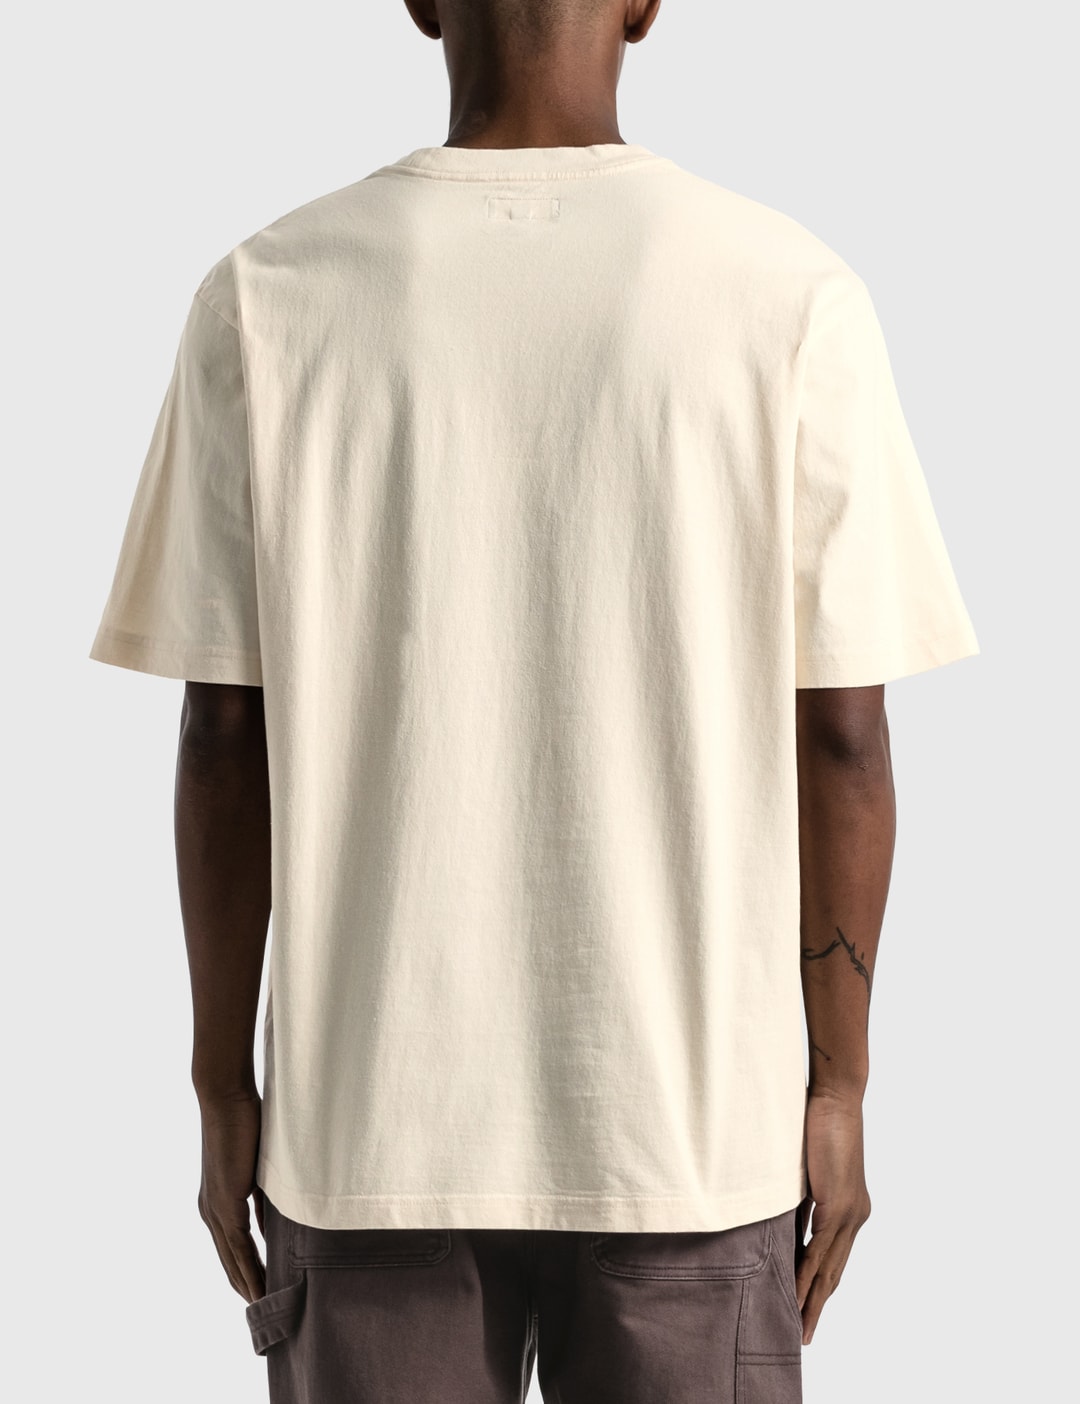 Stüssy - Overdyed Stock Logo Crew T-shirt | HBX - Globally Curated ...